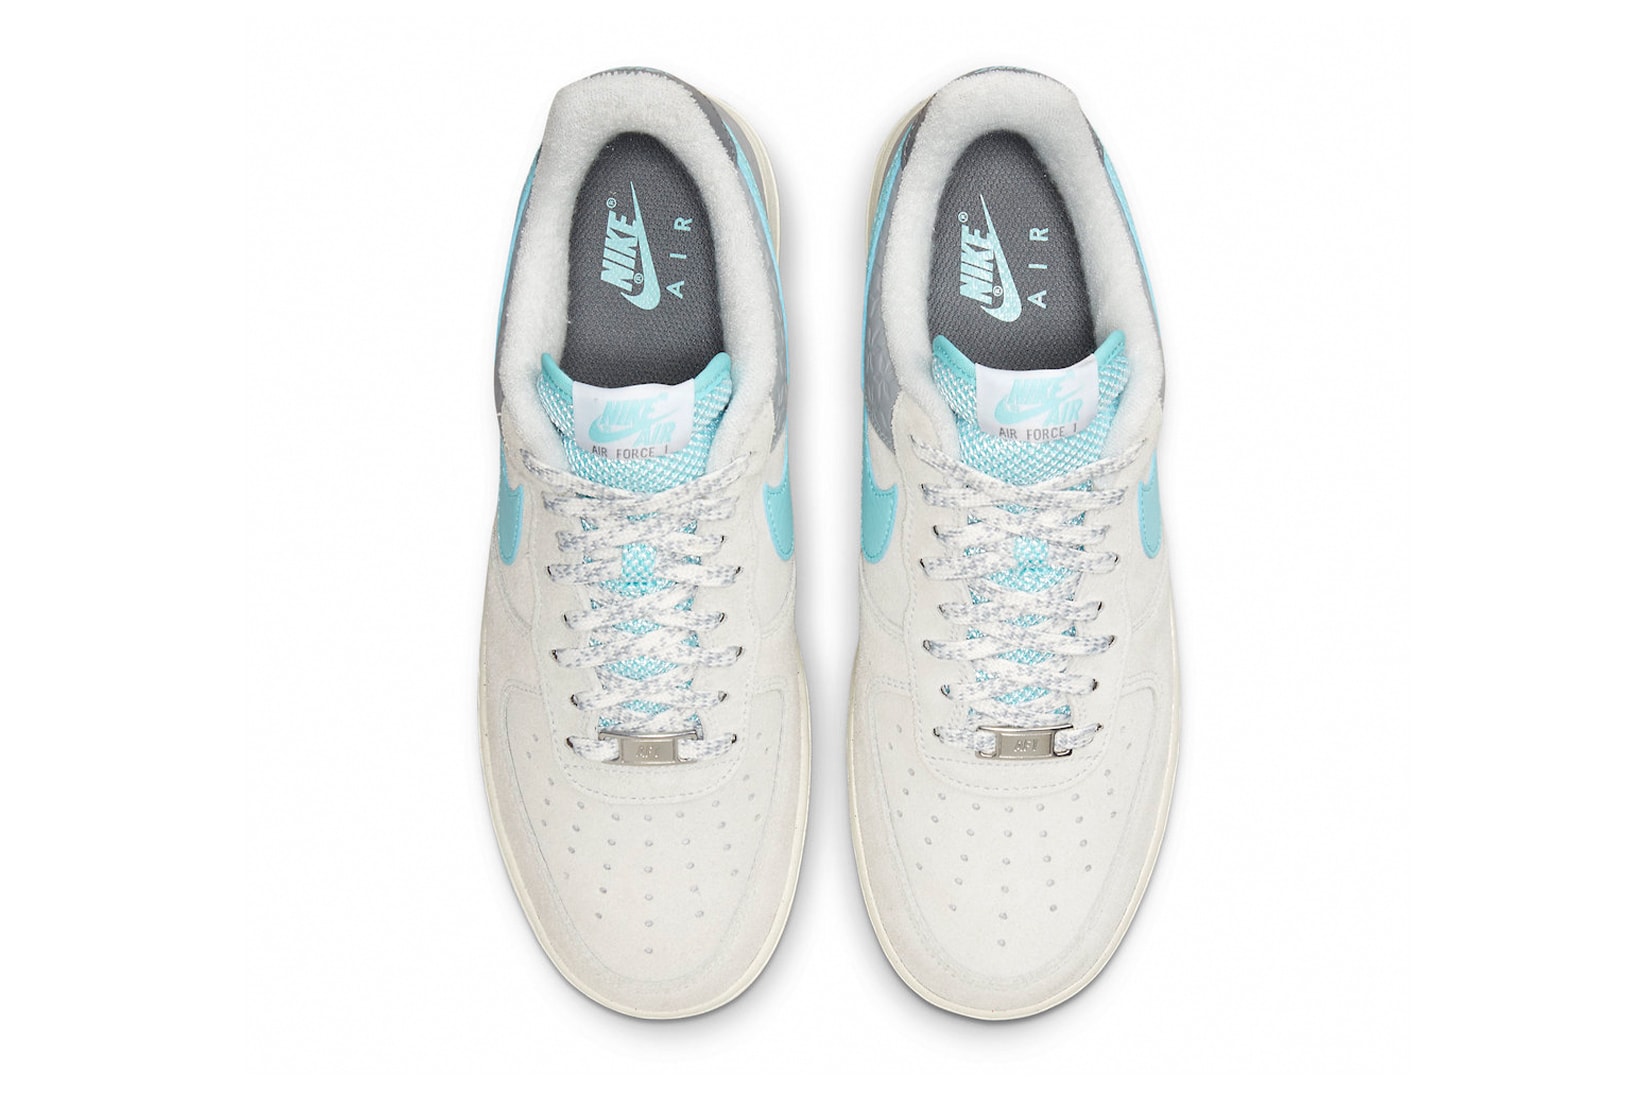 Nike Air Force 1 Low "Snowflake" Sneakers Blue White Gray Vamp Insoles